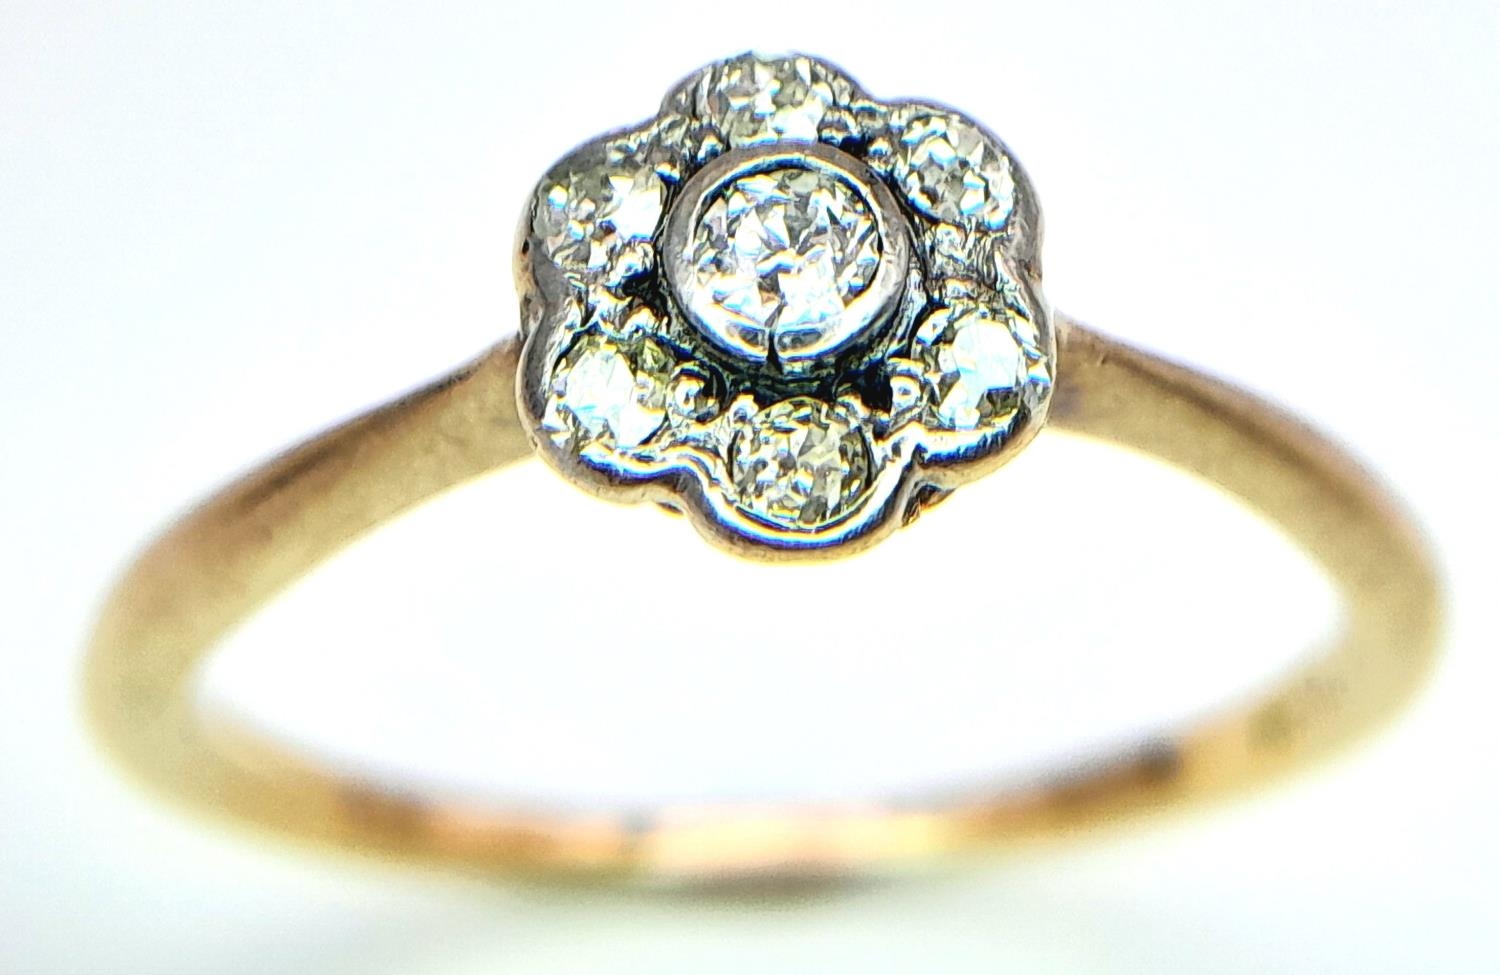 An Antique 18K Yellow Gold Old Cut Diamond Cluster Ring. Size N, 2.05g total weight.